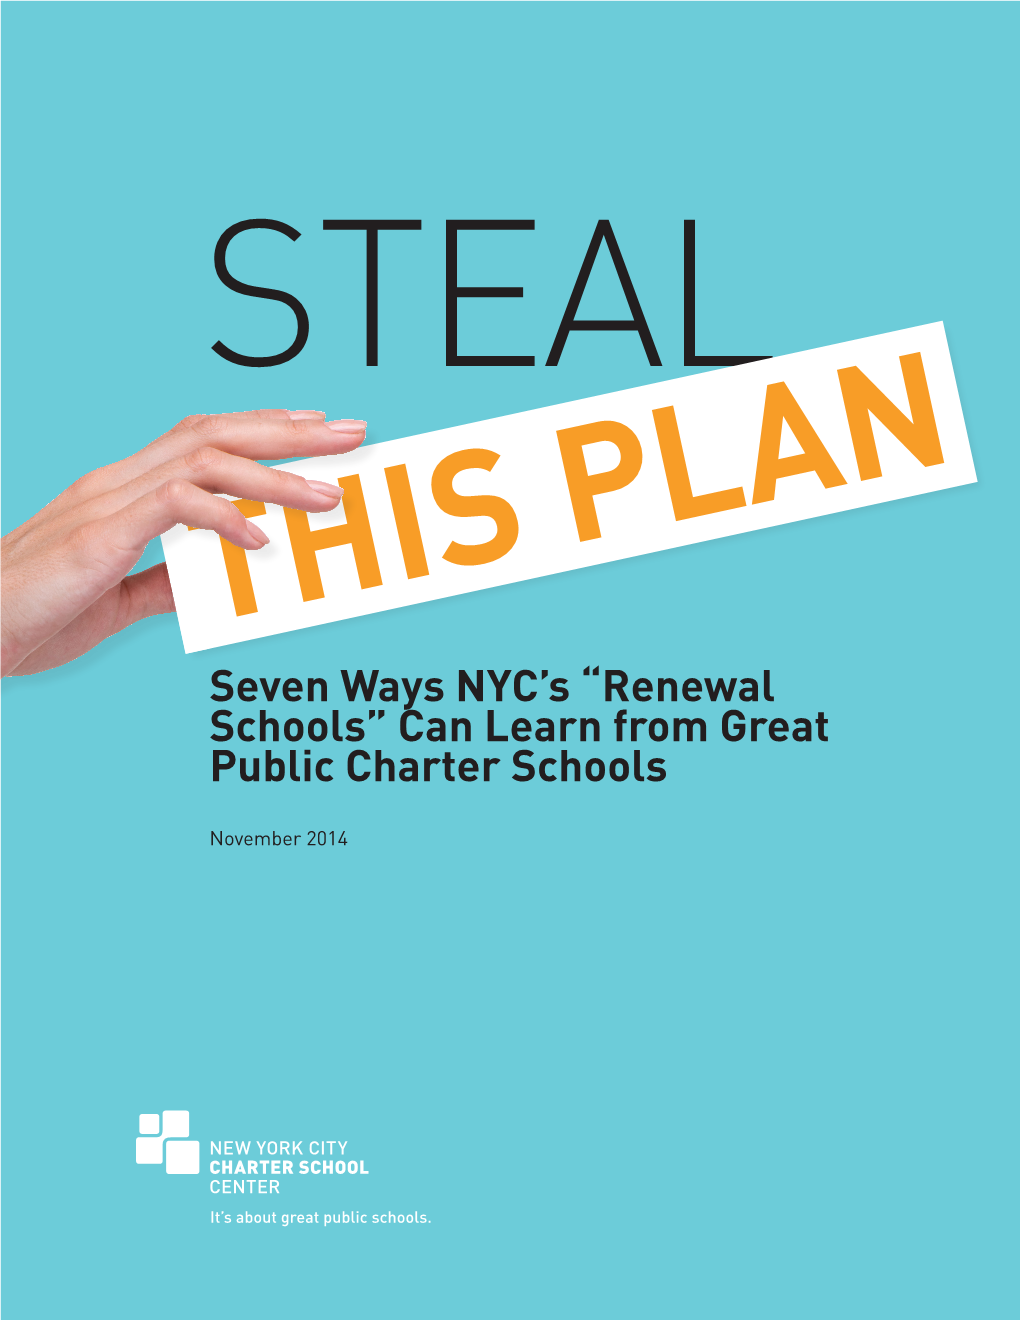 Renewal Schools” Can Learn from Great Public Charter Schools